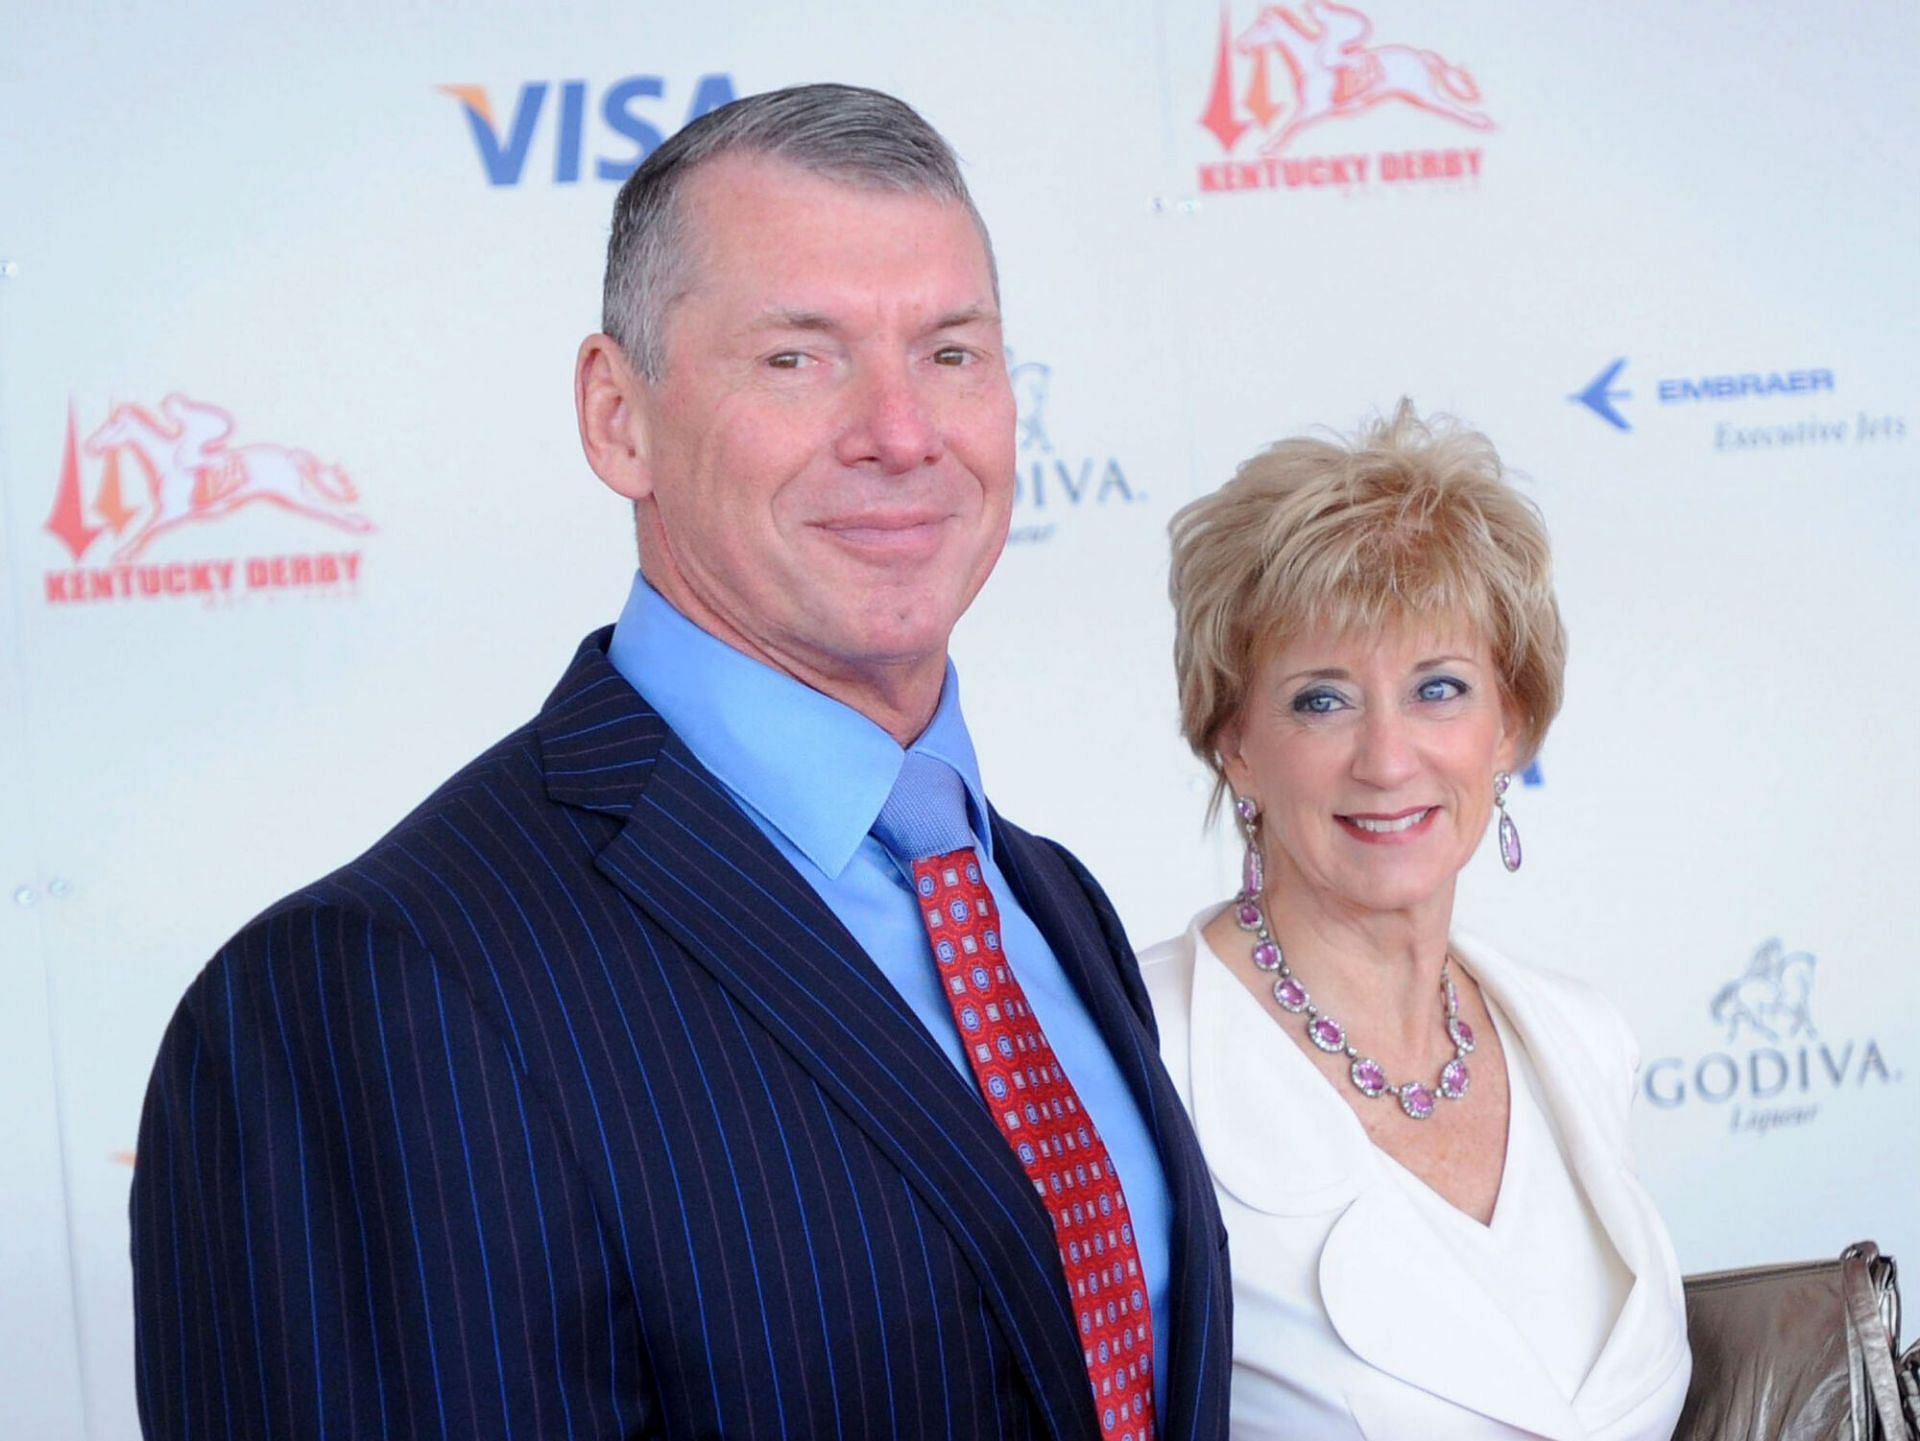 Vince McMahon and his wife at an event together